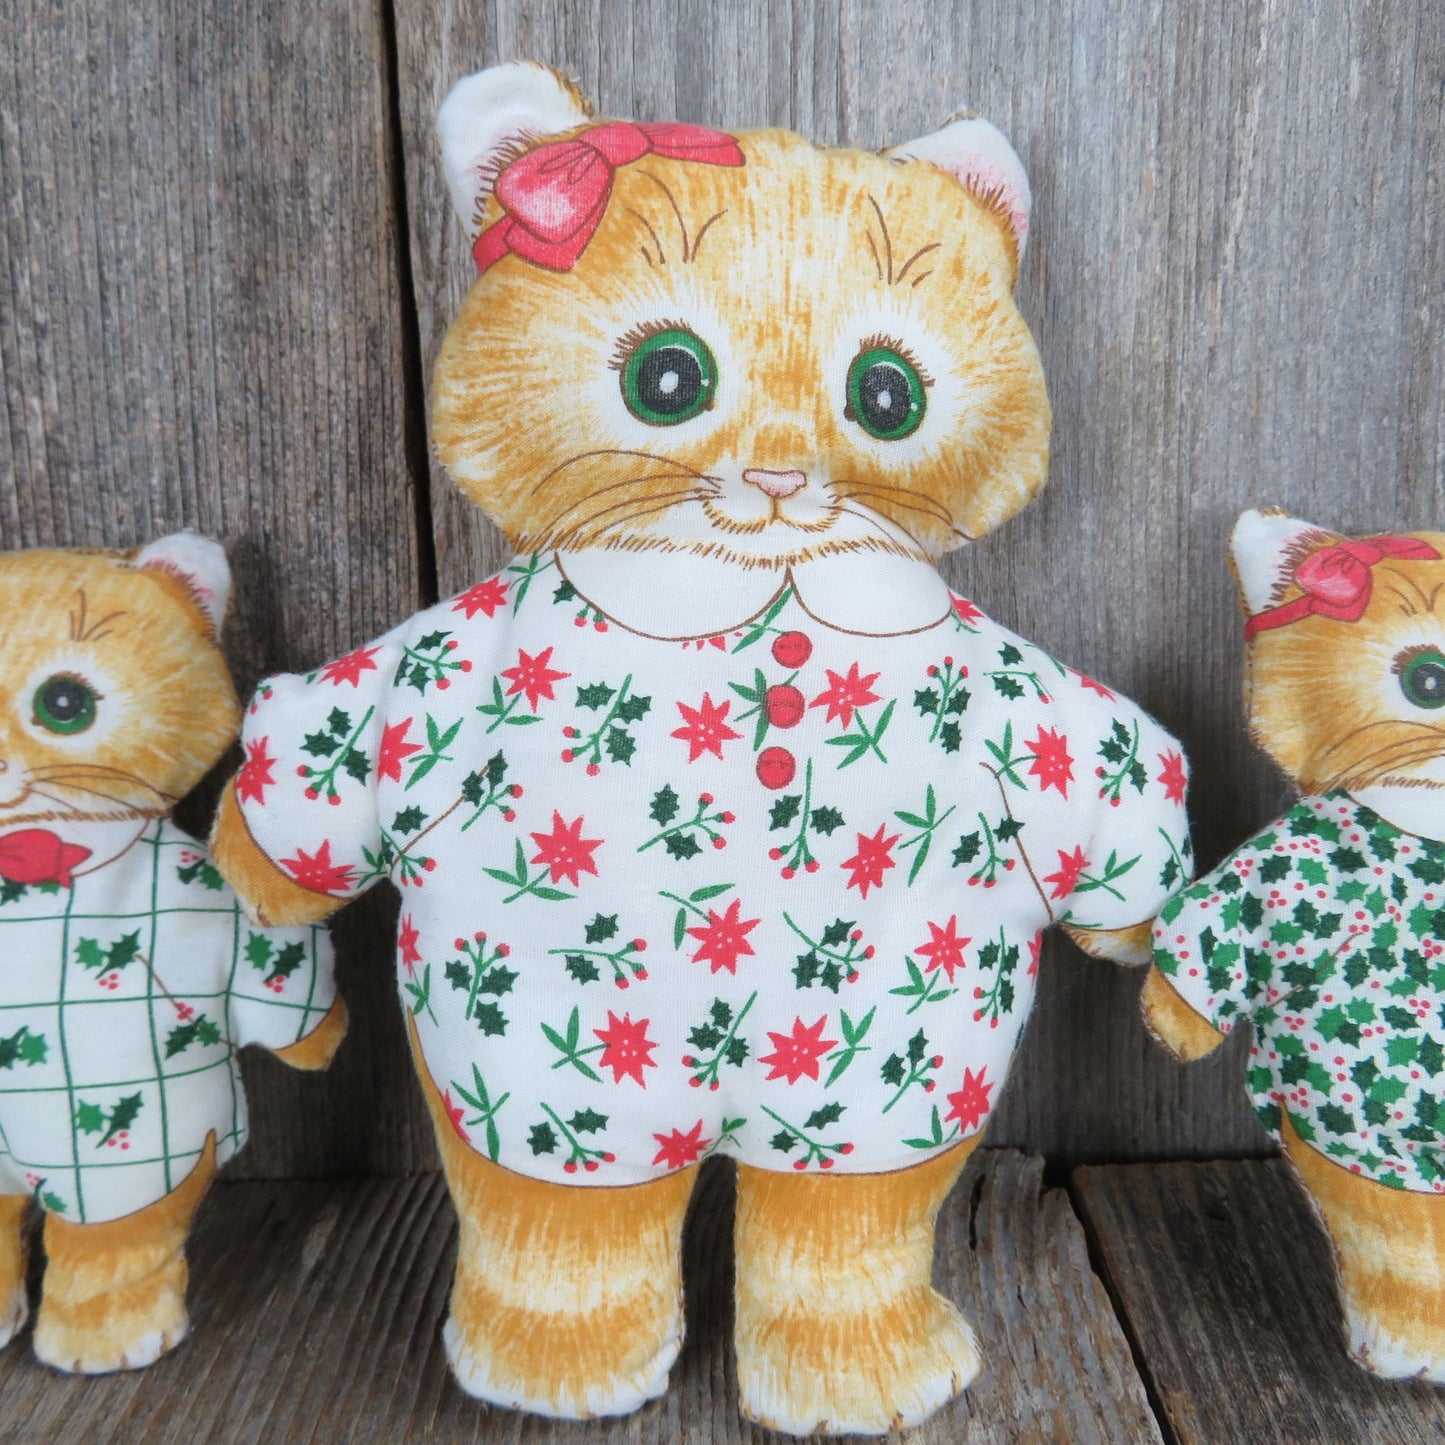 Three Little Kittens Pillow Dolls Cut and Sew Christmas Cats in Pajamas Fabric Stuffed Animal Set